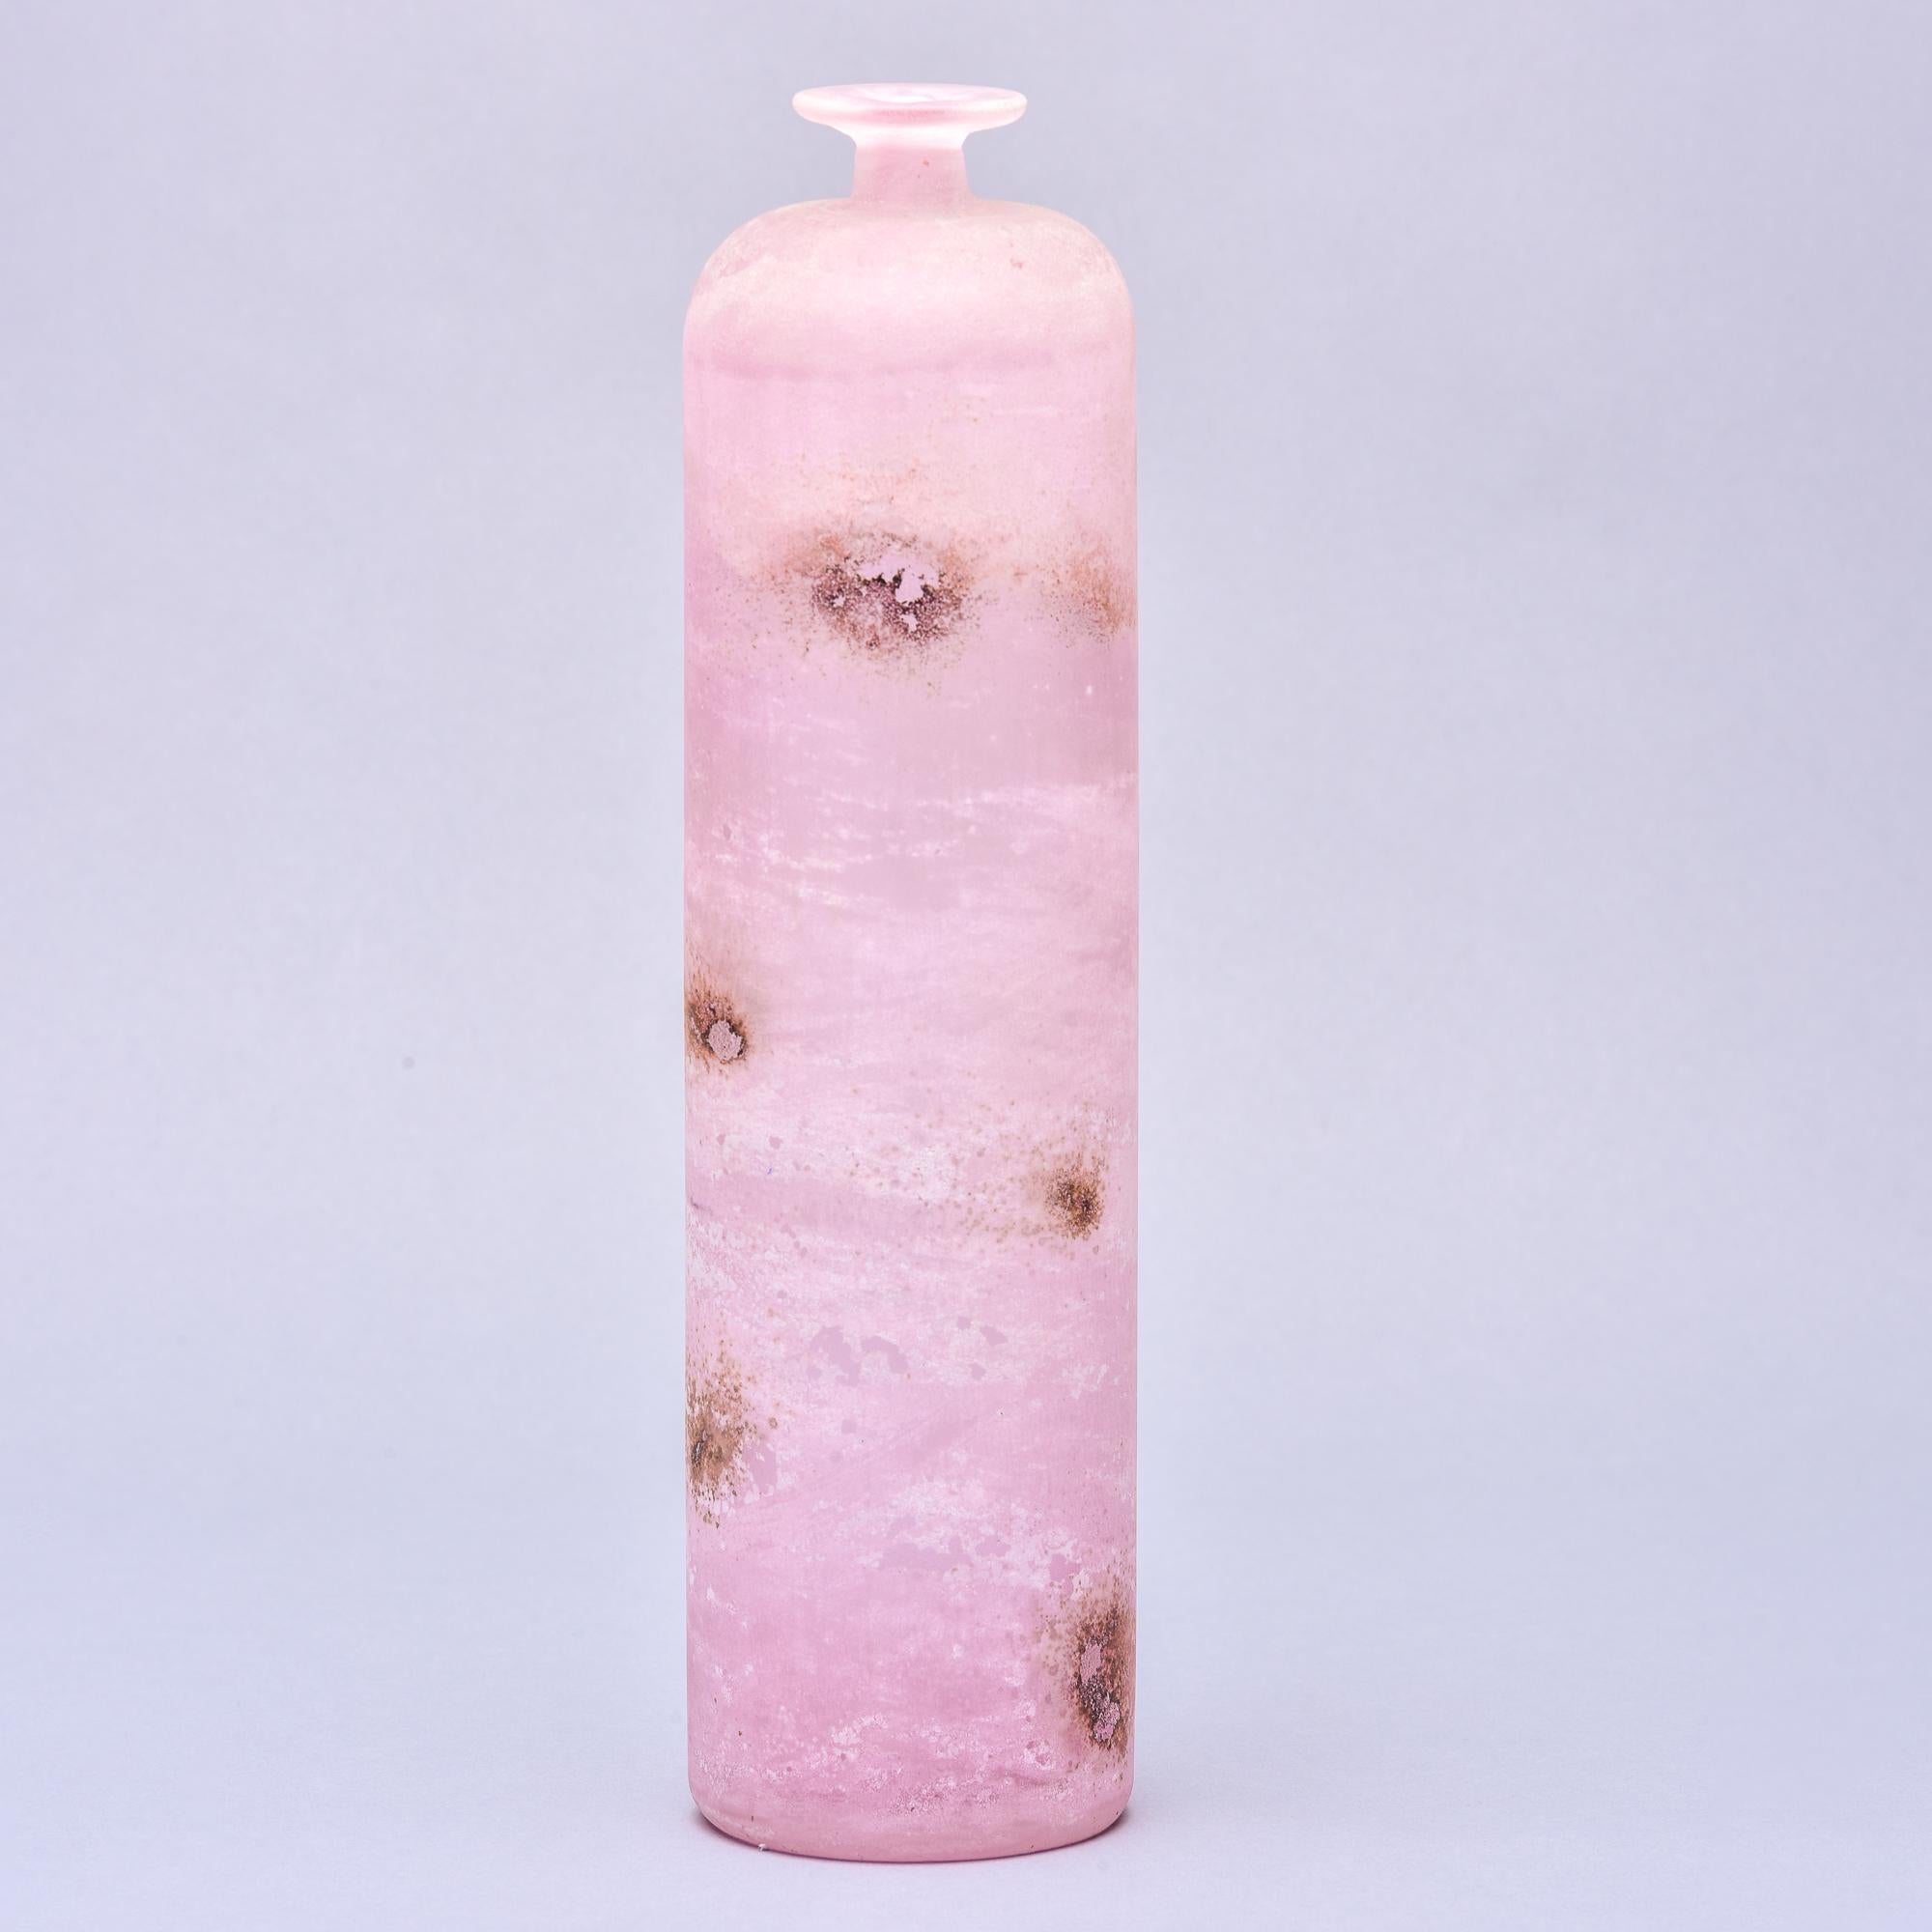 Circa 1960s signed Cenedese tall bottle style vase with narrow neck and rim in pink scavo-style Murano glass. Etched signature on underside of base. 

Very good vintage condition with no flaws found.